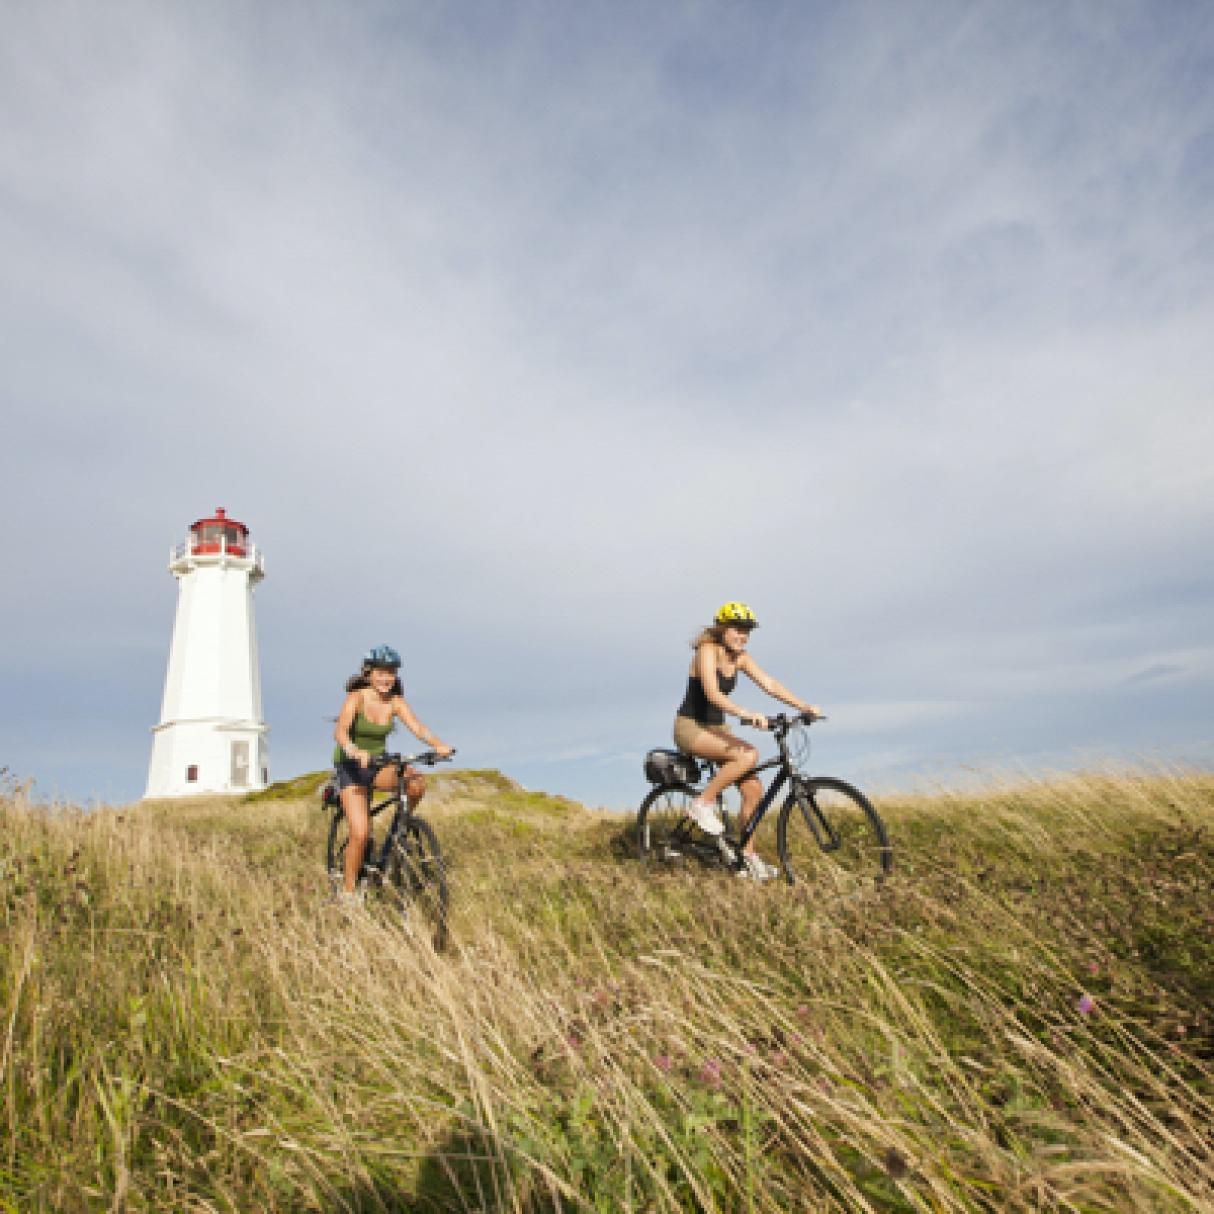 Cycling by a lighthouse on the renowned Cabot Trail!